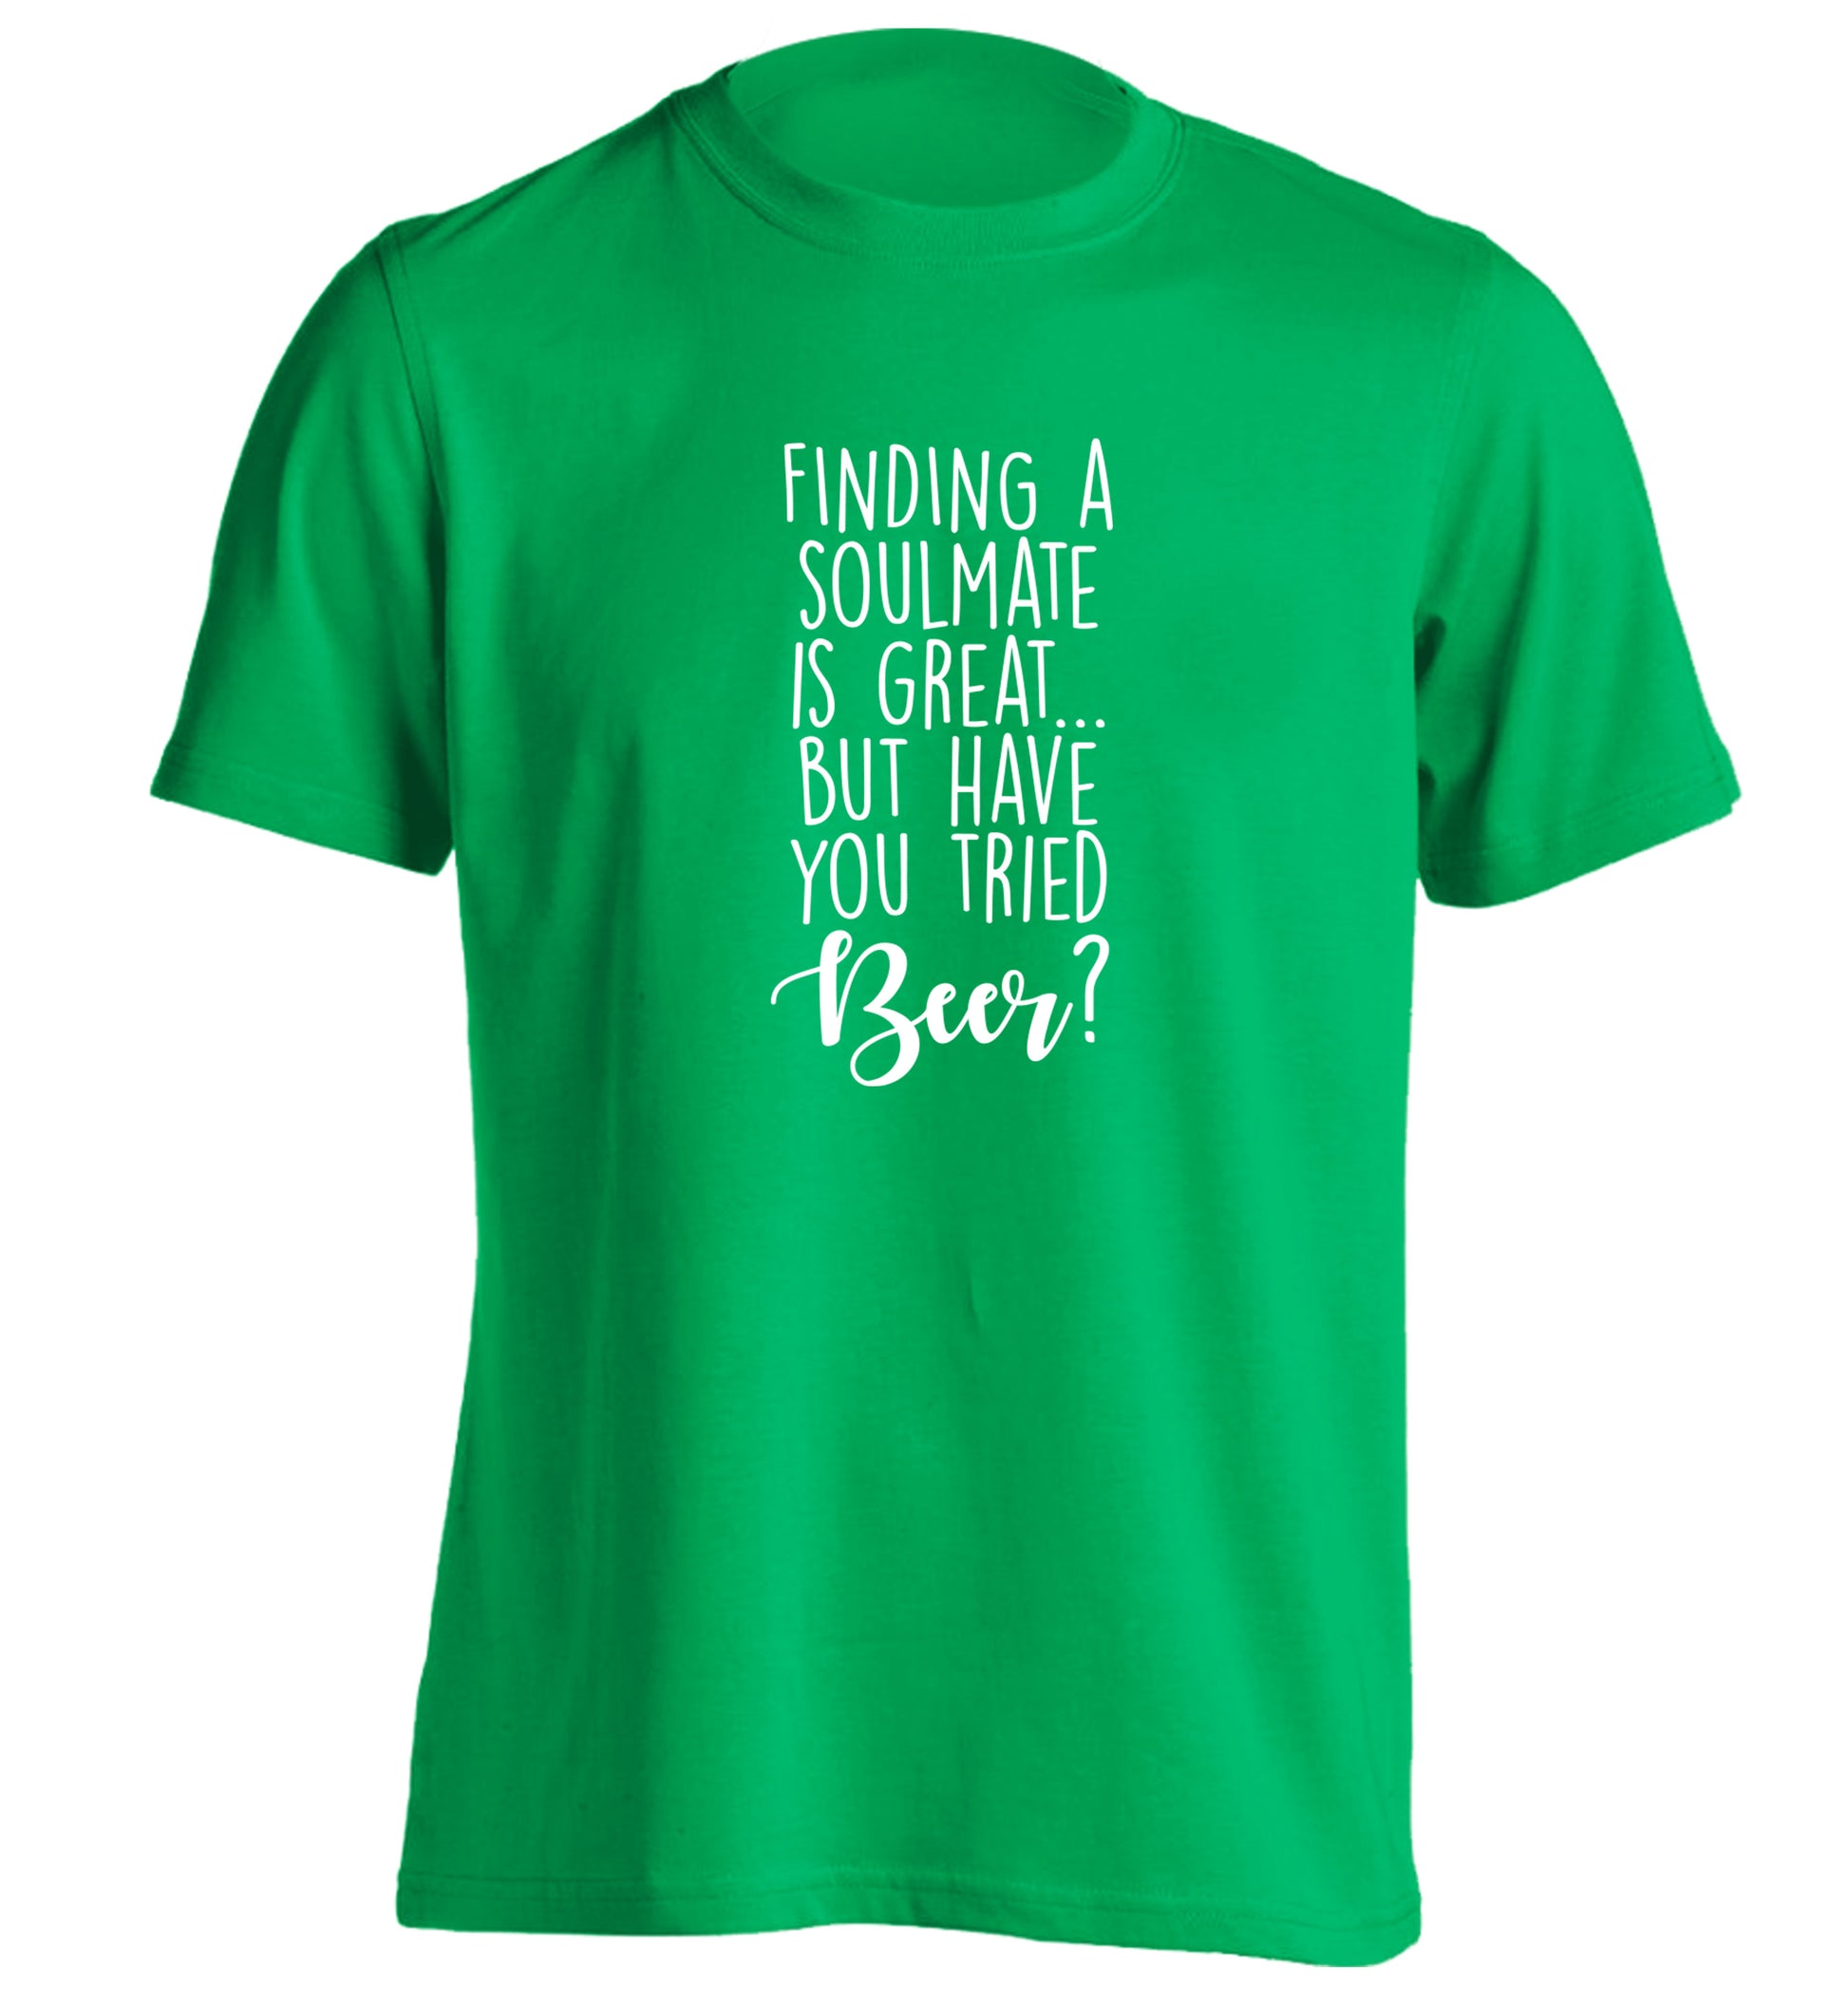 Finding a soulmate is great but have you tried beer? adults unisex green Tshirt 2XL